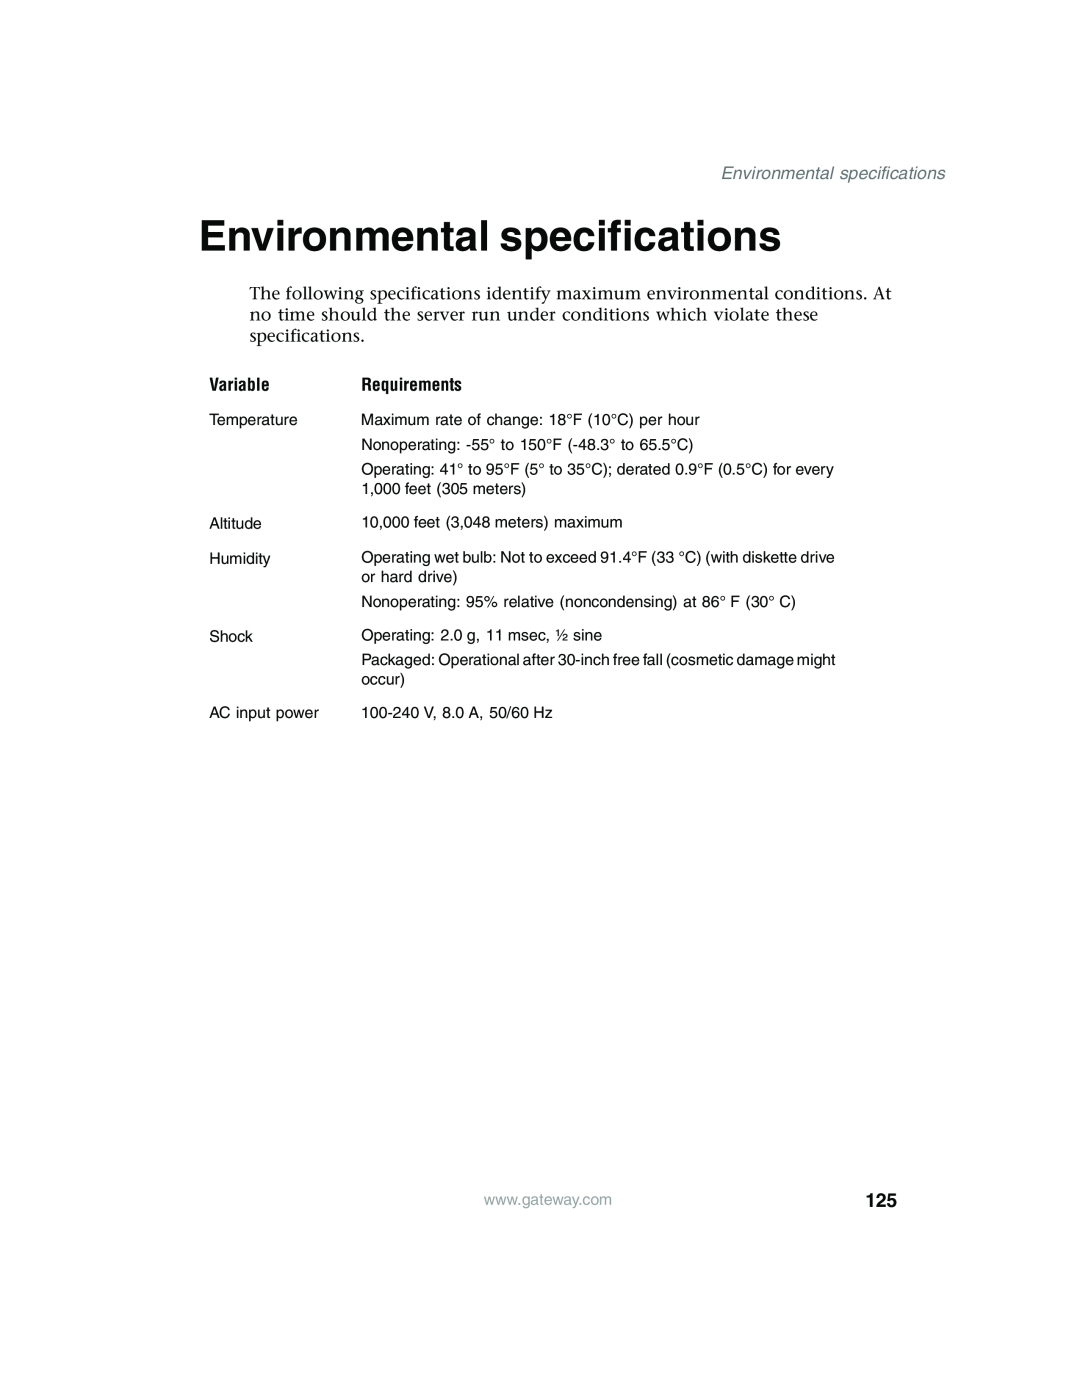 Gateway 960 manual Environmental specifications, Variable, Requirements 